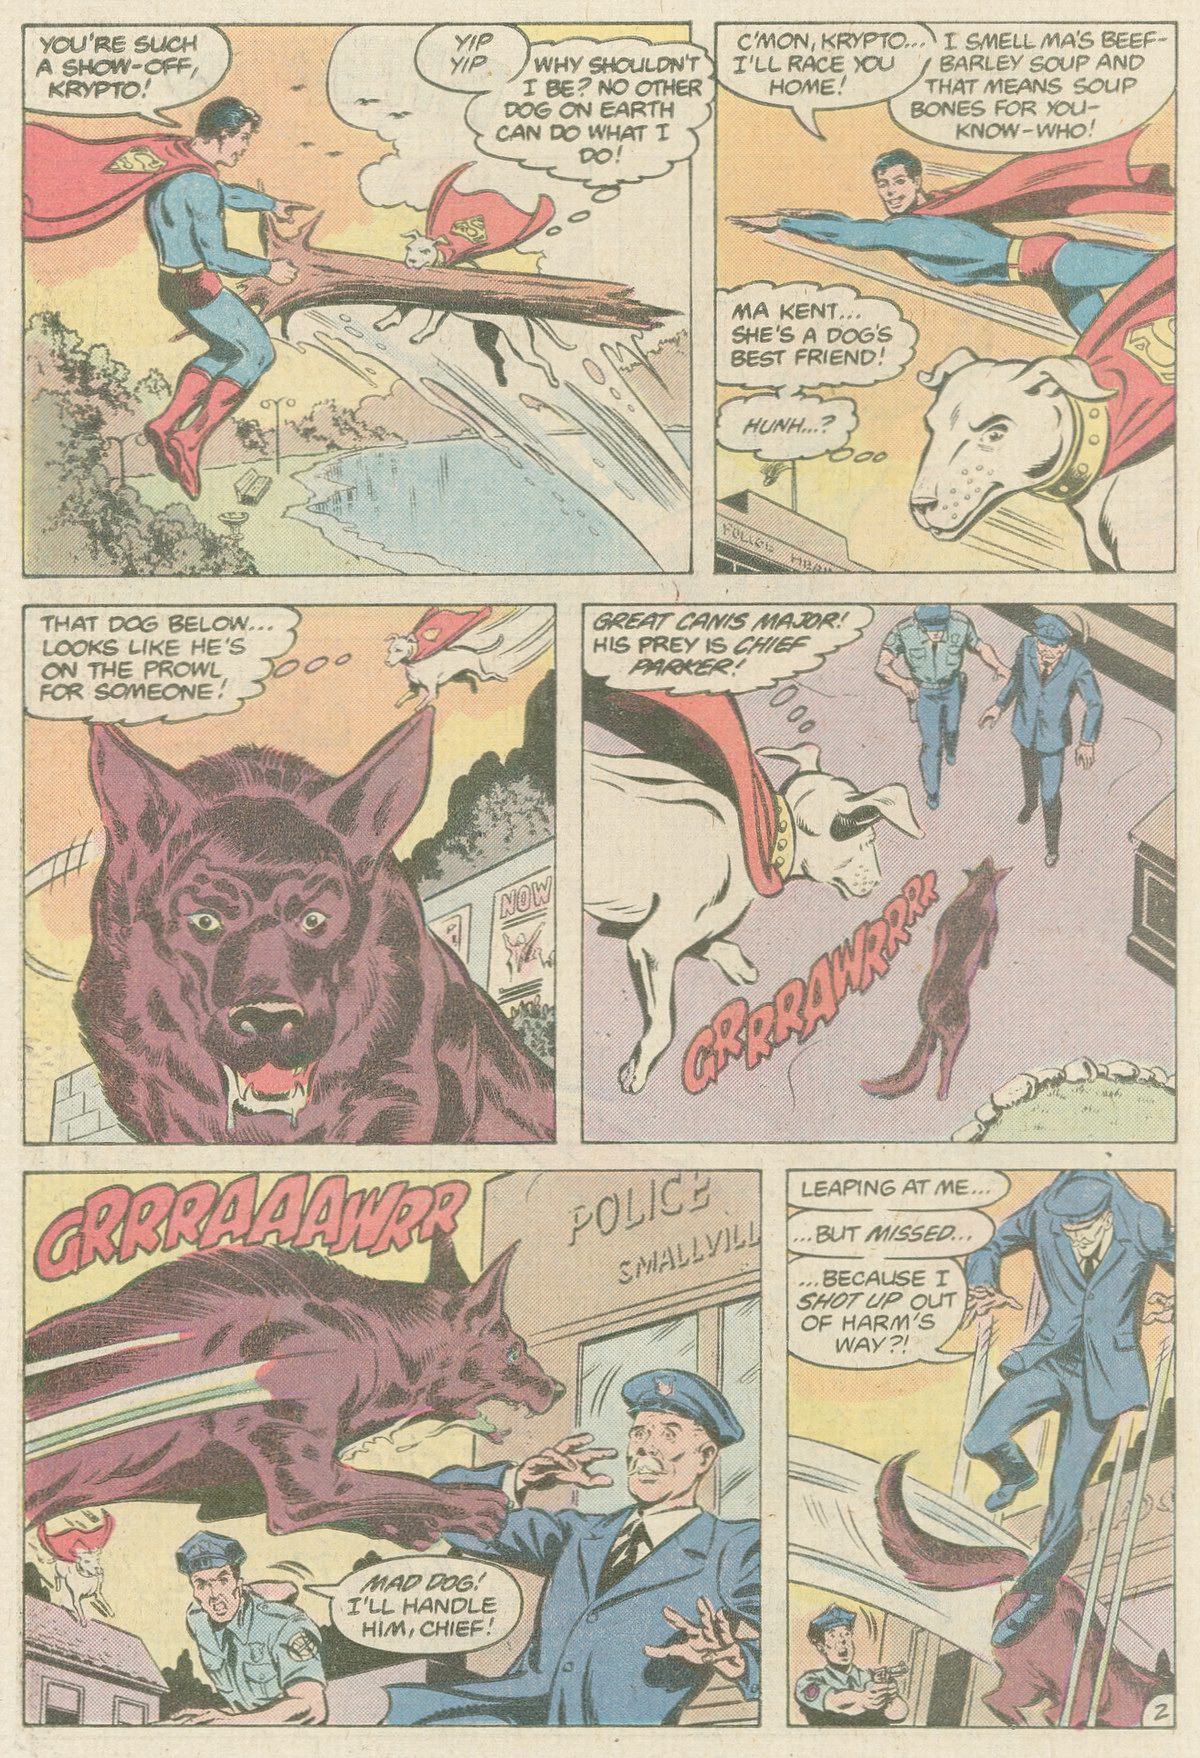 The New Adventures of Superboy 22 Page 22